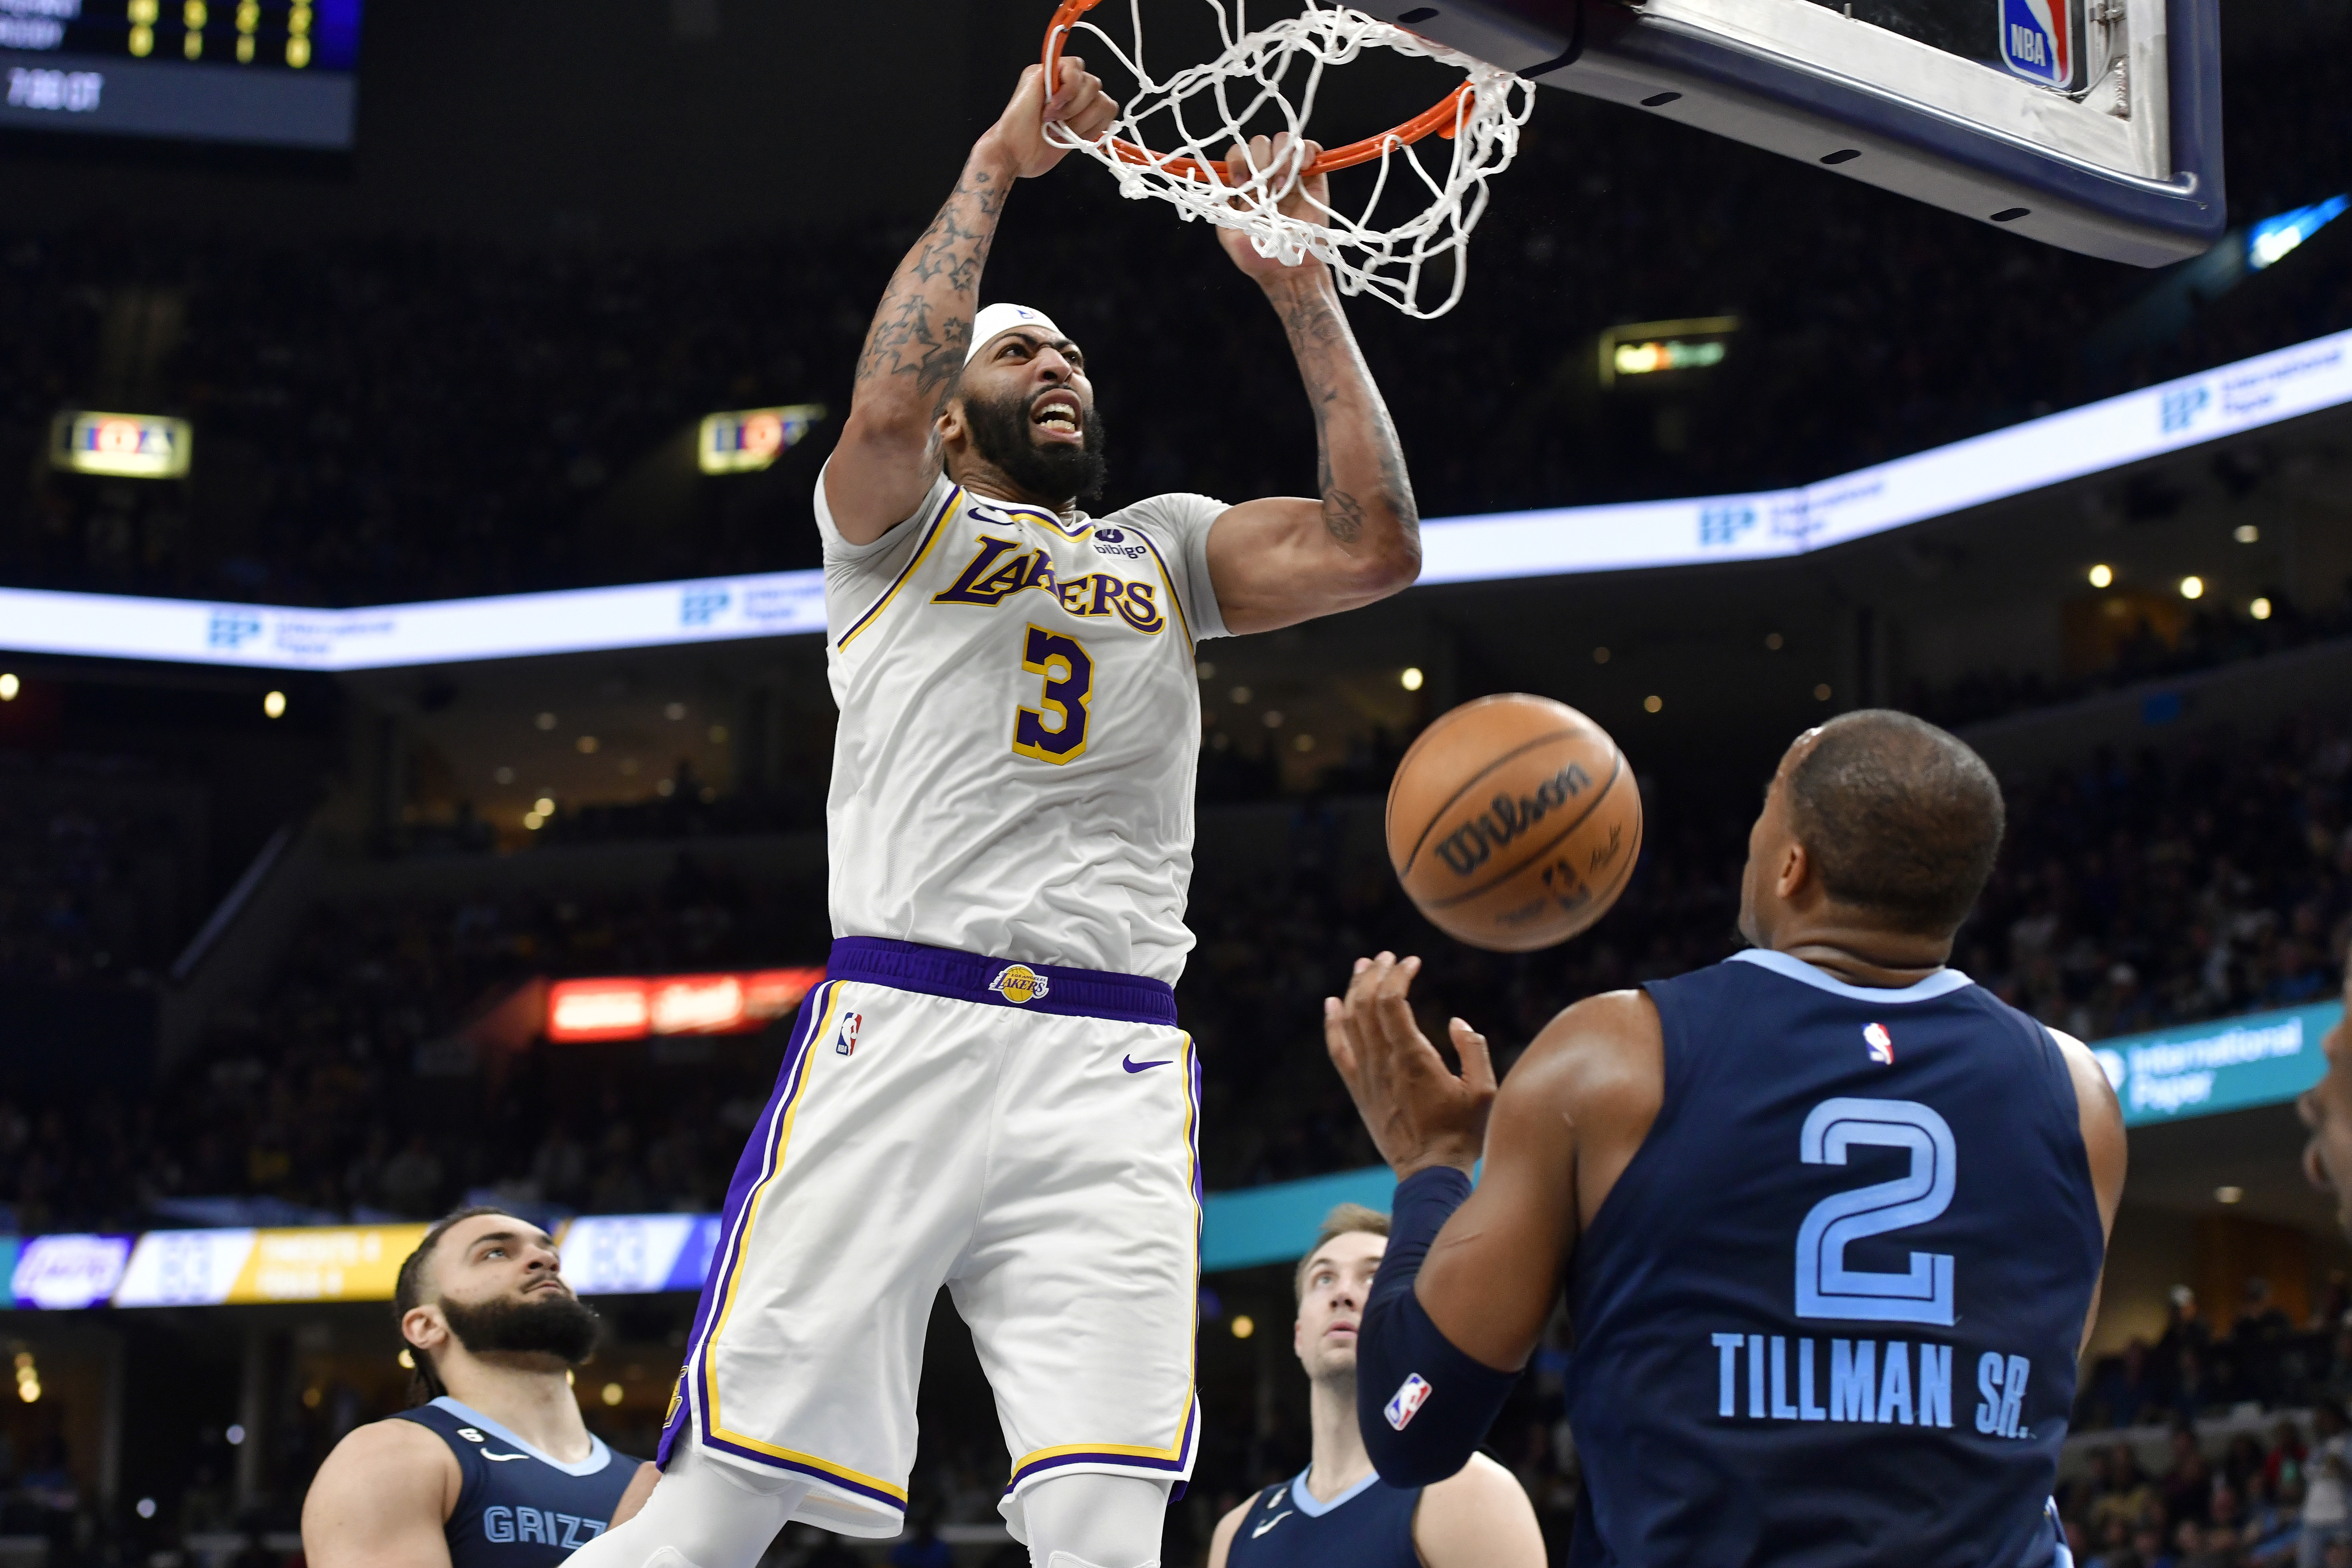 Lakers vs Grizzlies free live stream, Game 2 NBA playoffs TV